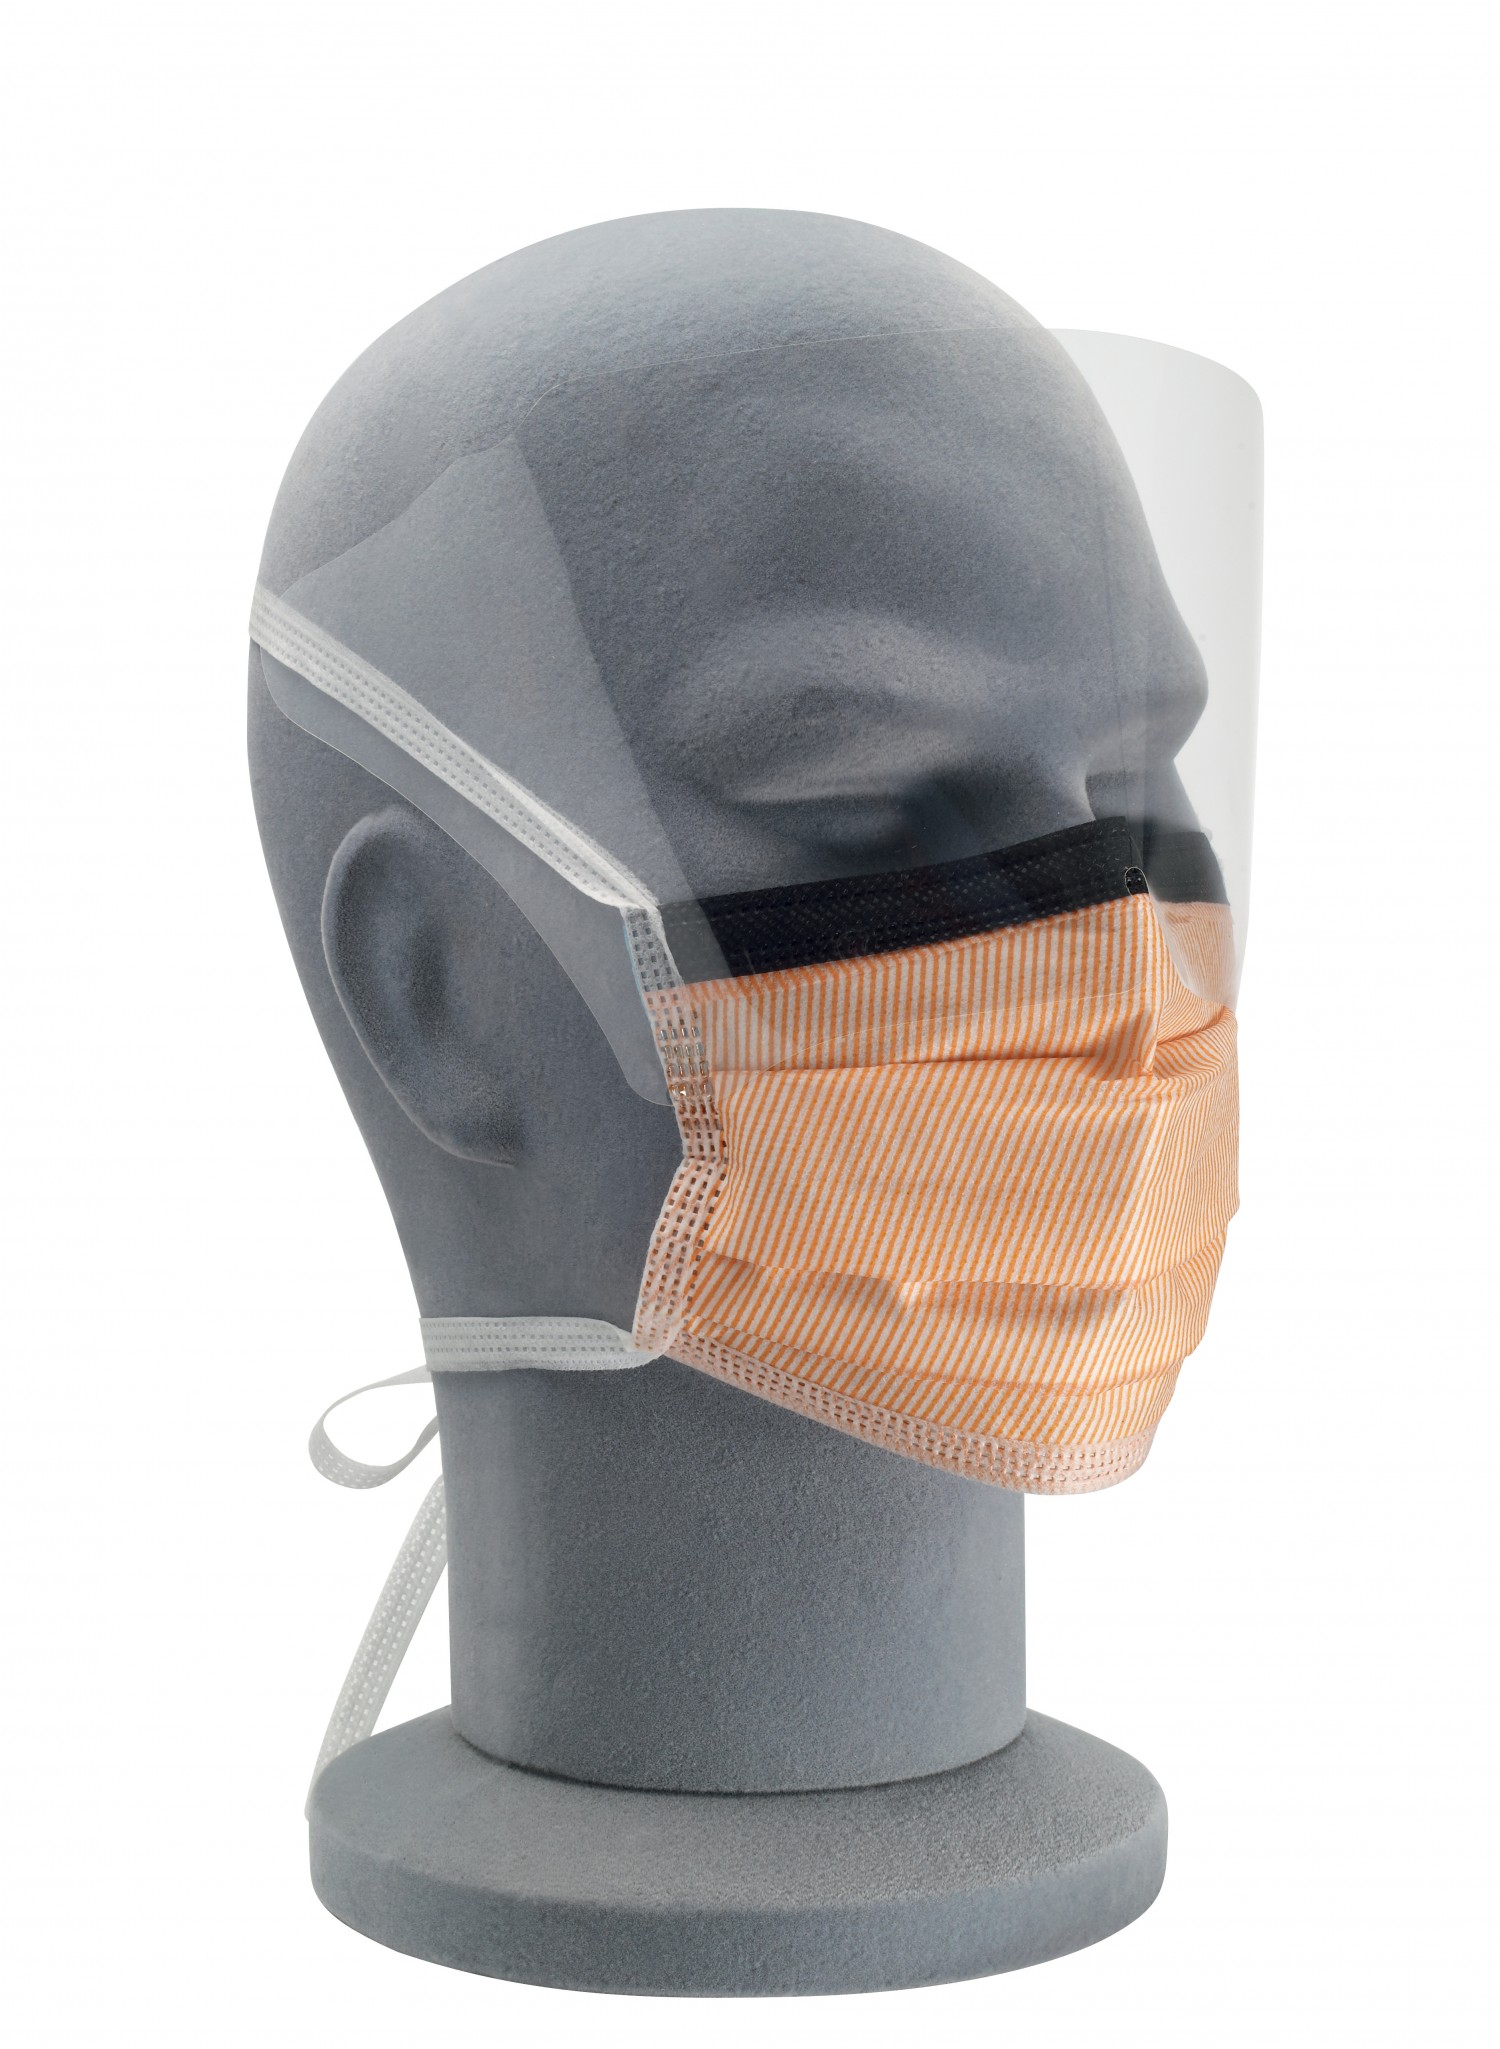 protec surgical mask